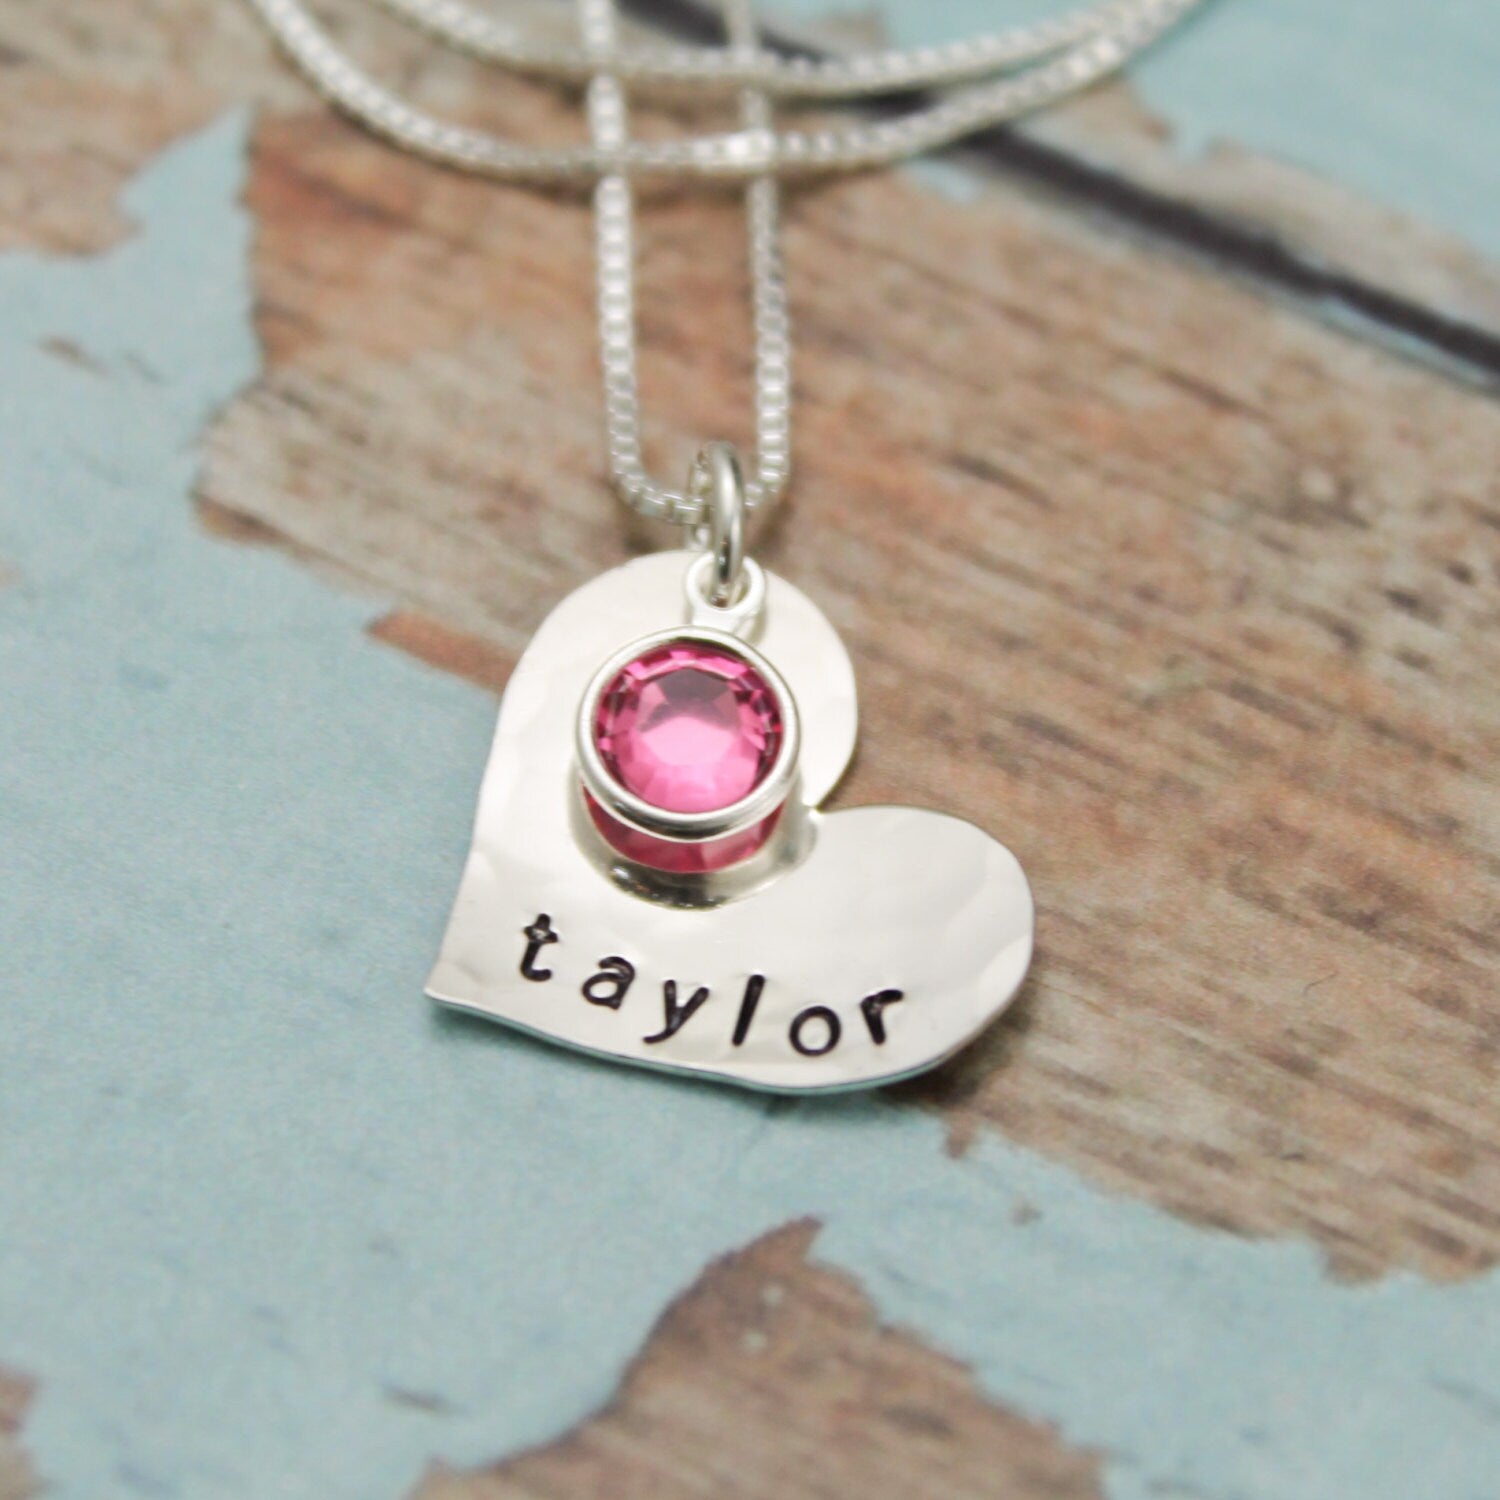 Sweetheart Necklace with Birthstone - Hand Stamped - Personalized - Sterling Silver